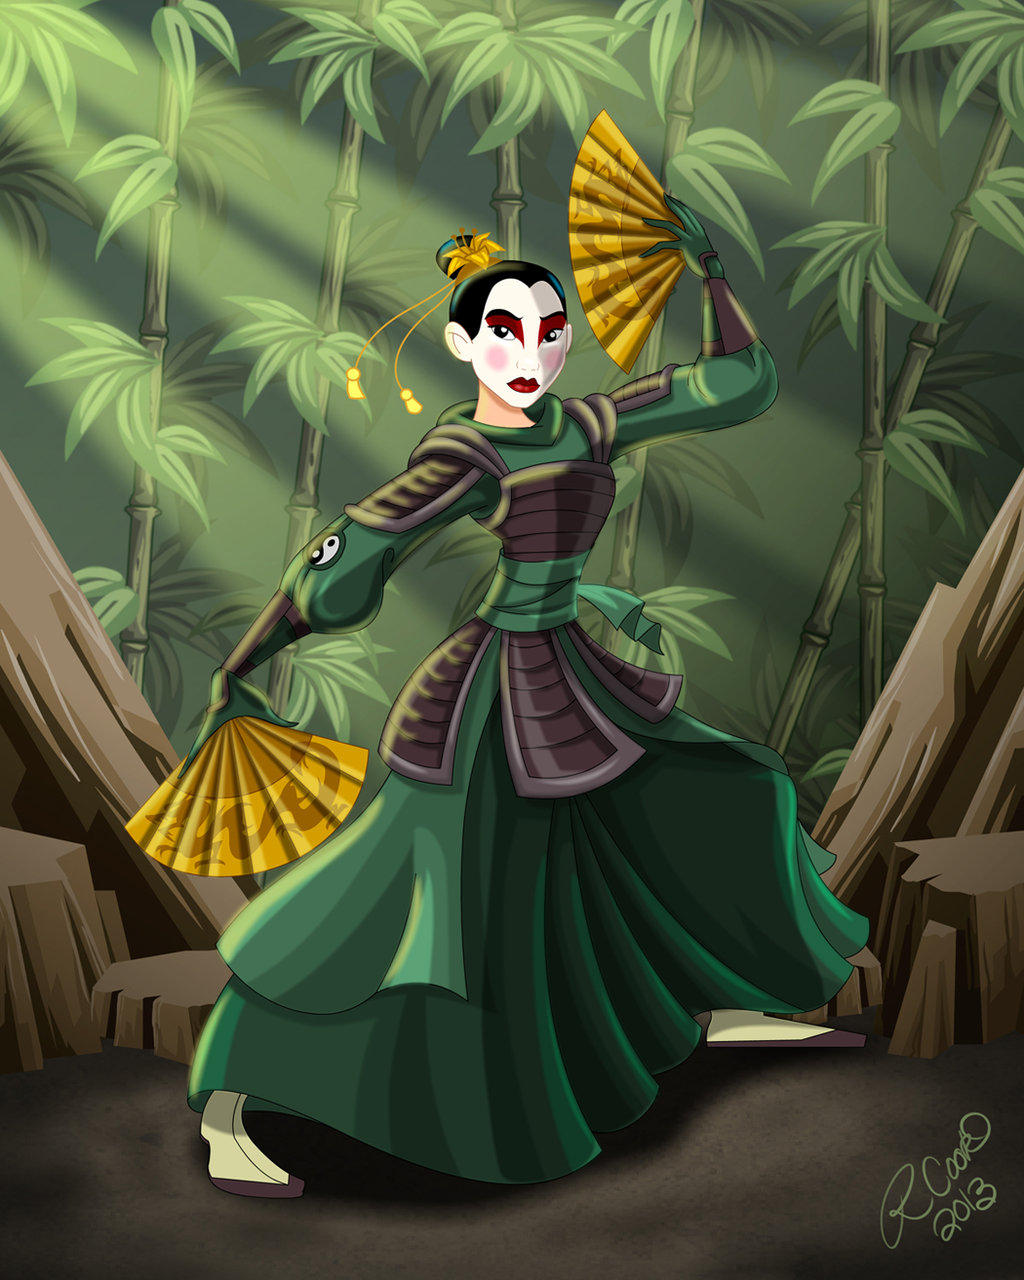 mulan_of_the_kyoshi_warriors_by_racookie3-d69d21l.jpg